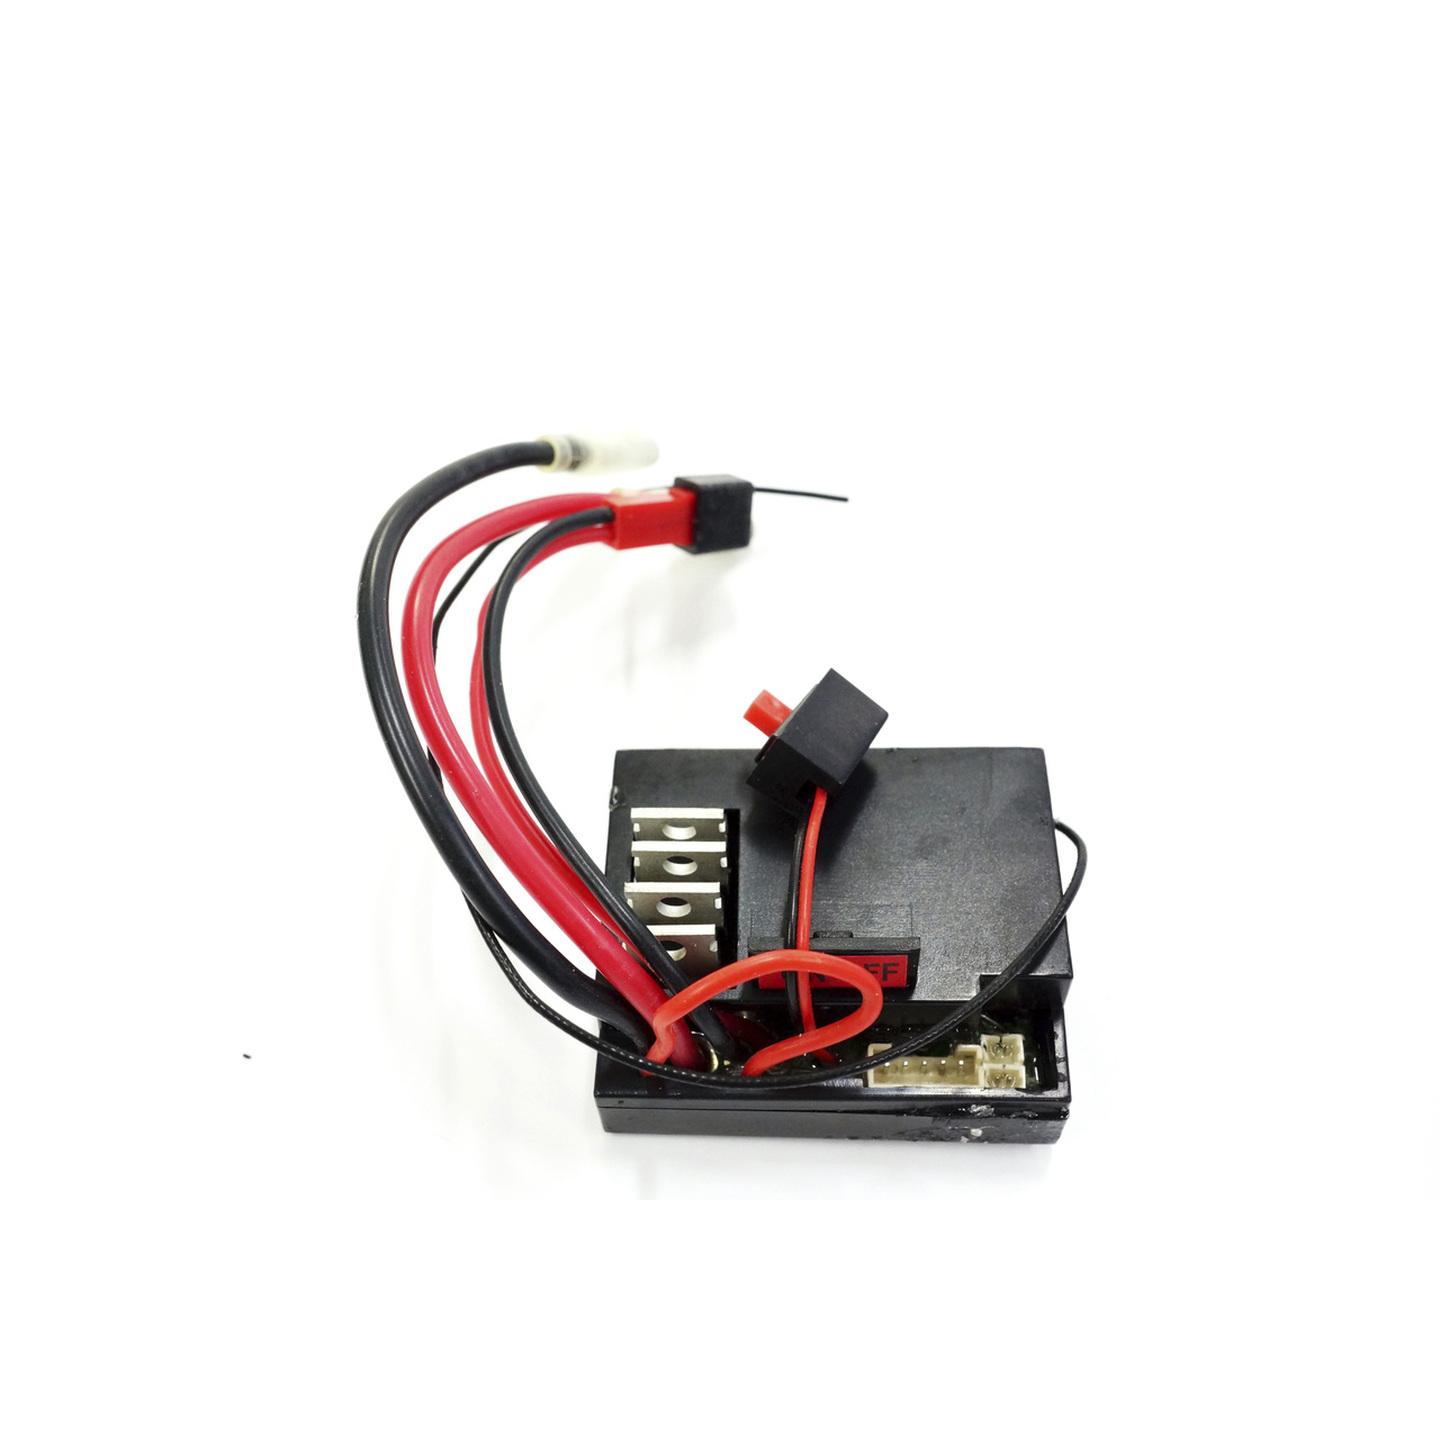 Spare Receiver PCB Board for GT3786 Truggy